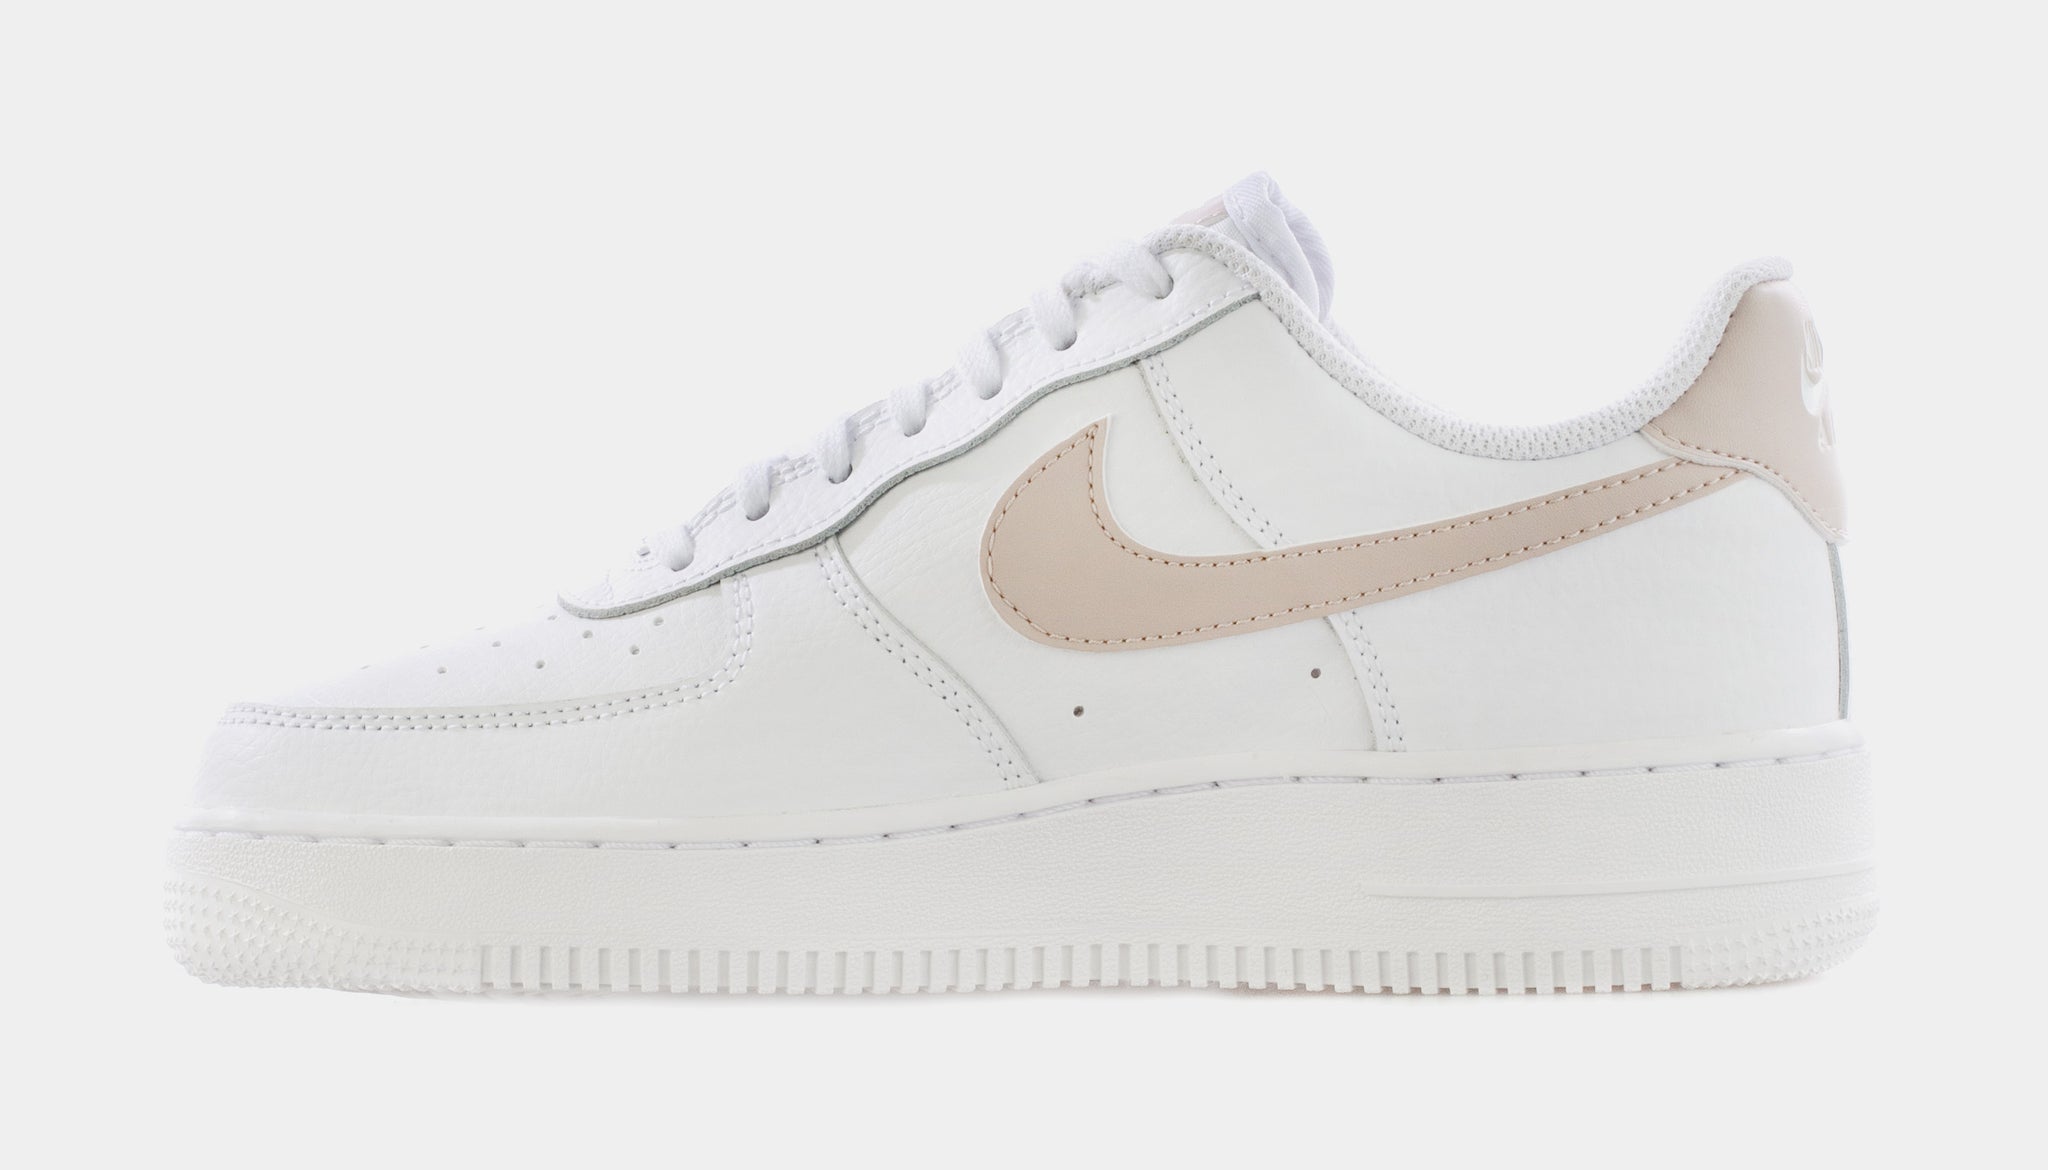 Nike Air Force AF1 '07 Women's Sneaker Shoe Limited Edition Beige  DQ7782-200 